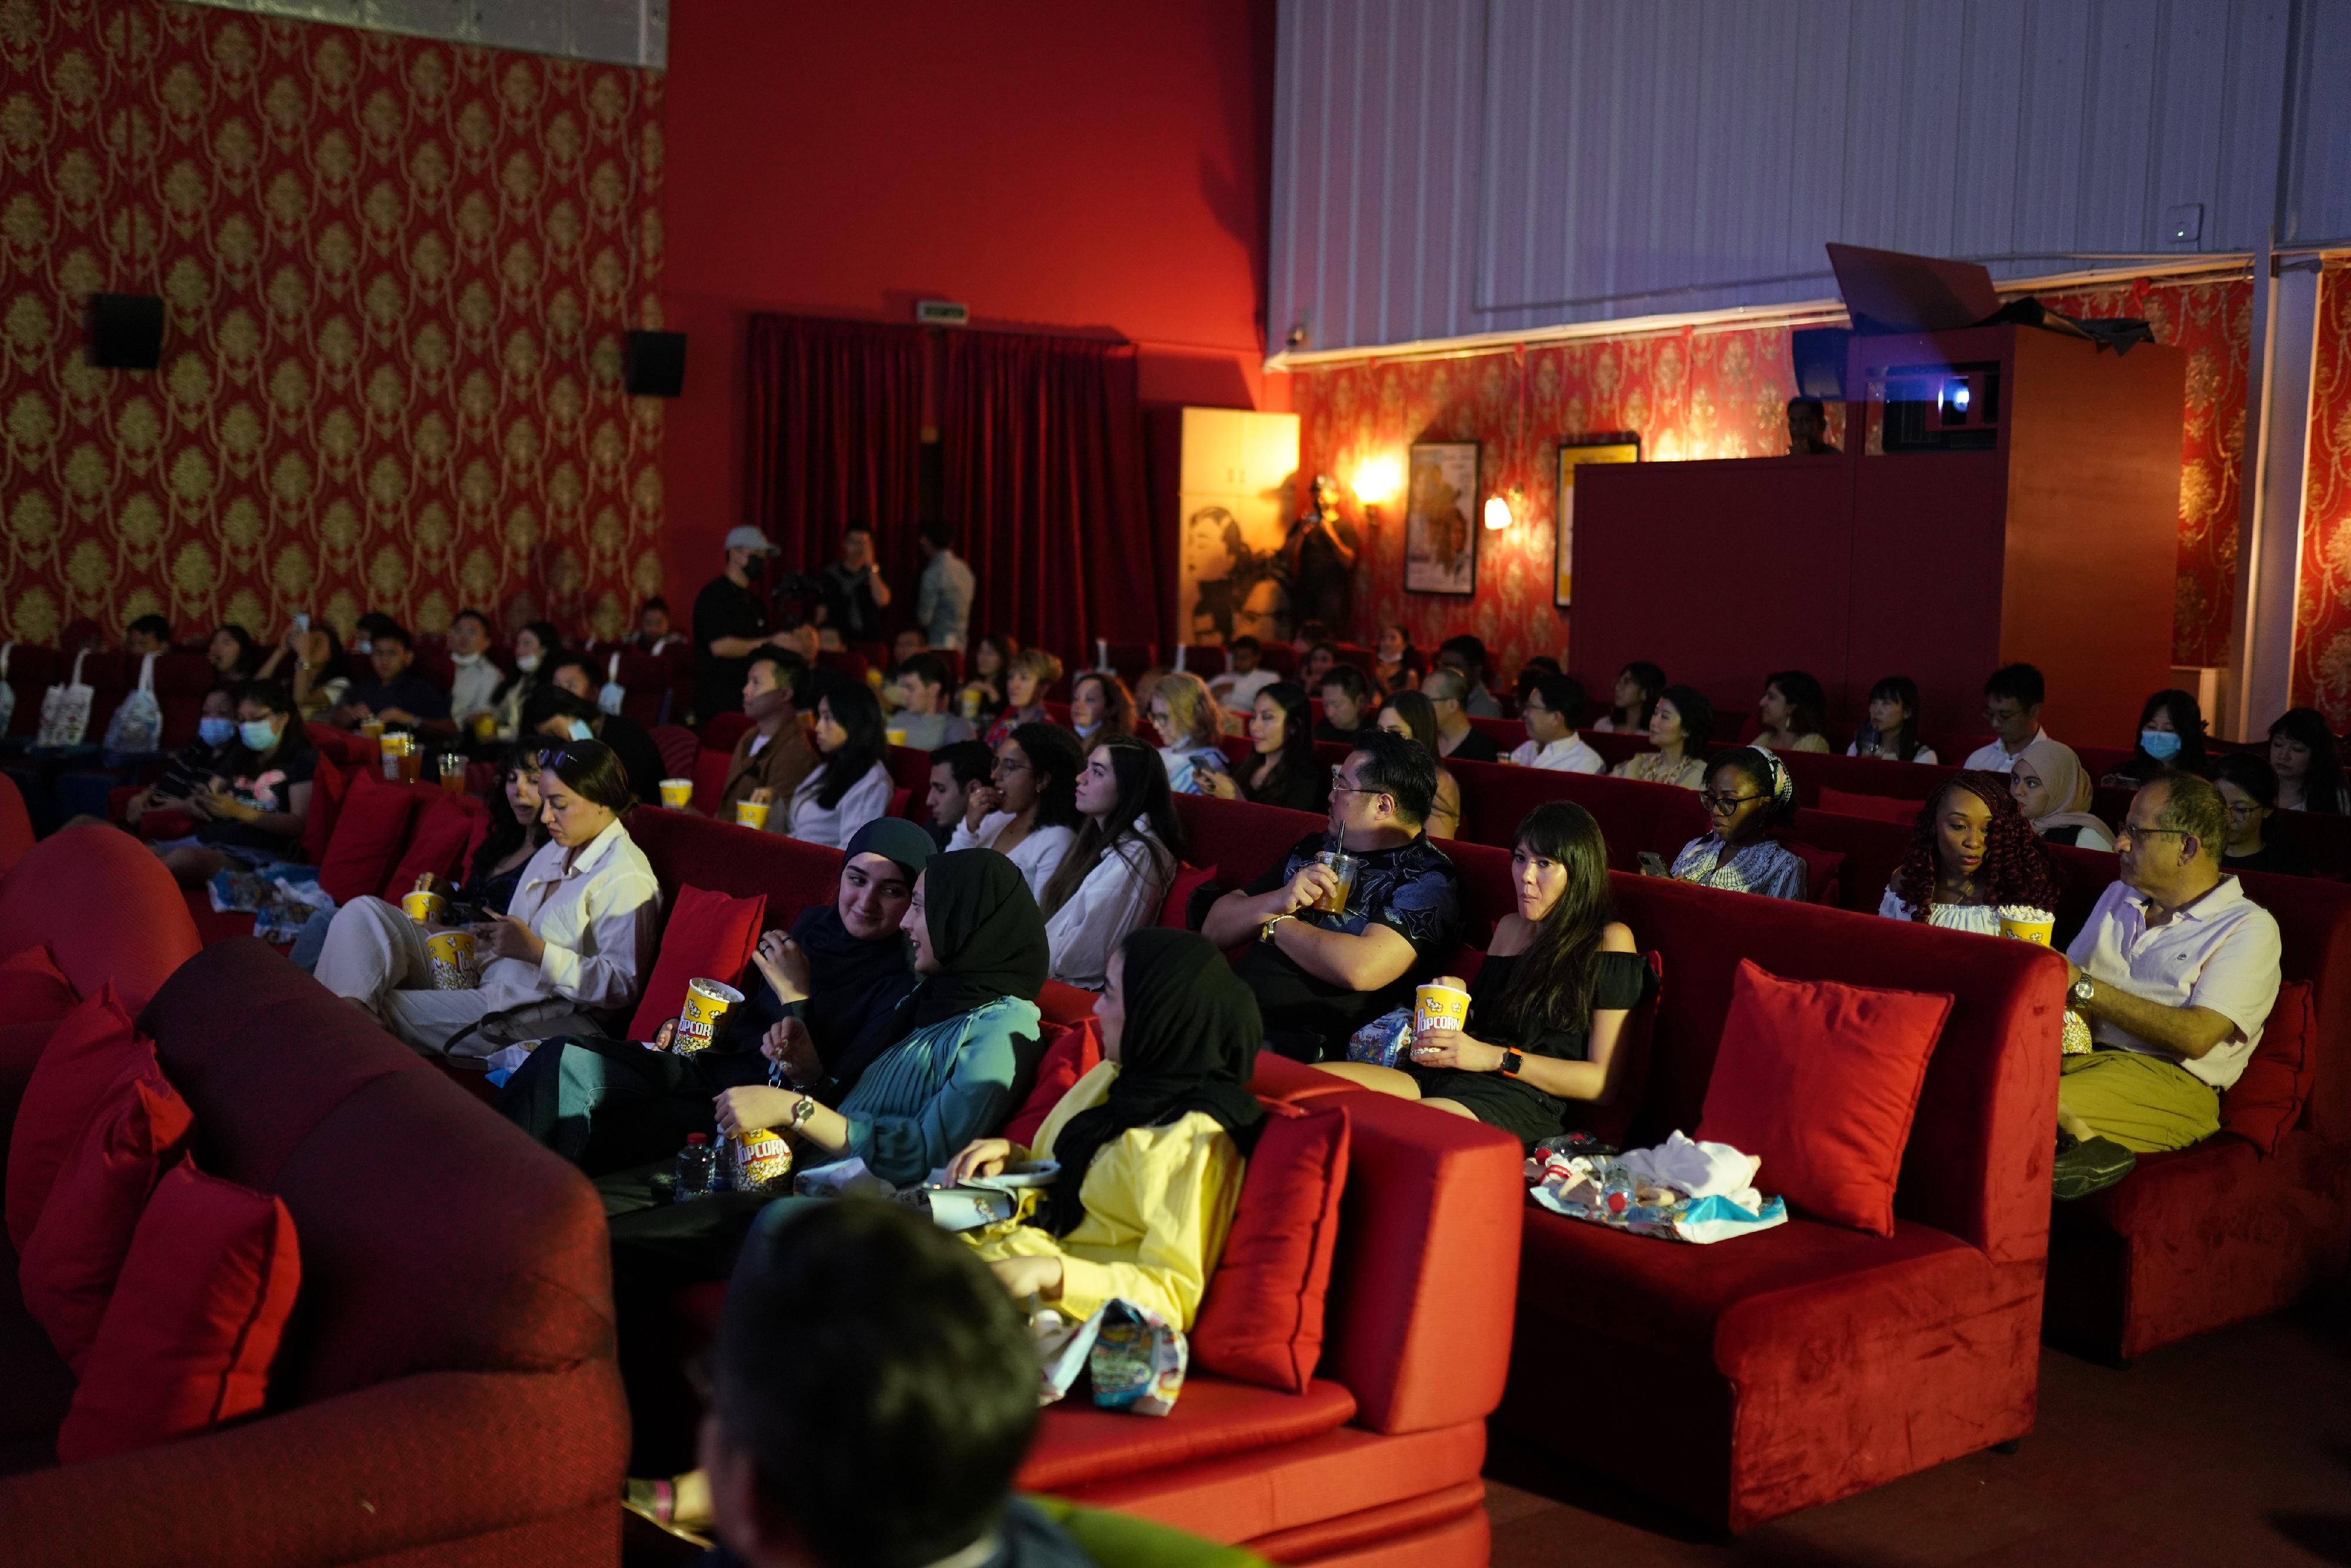 With the support of the Hong Kong Economic and Trade Office in Dubai, the Hong Kong film "Hand Rolled Cigarette" directed by Chan Kin-long was screened on April 1 (Dubai time) at Dubai's Cinema Akil. Photo shows some 100 local film enthusiasts and members of the Hong Kong community in the United Arab Emirates in attendance at the screening. 